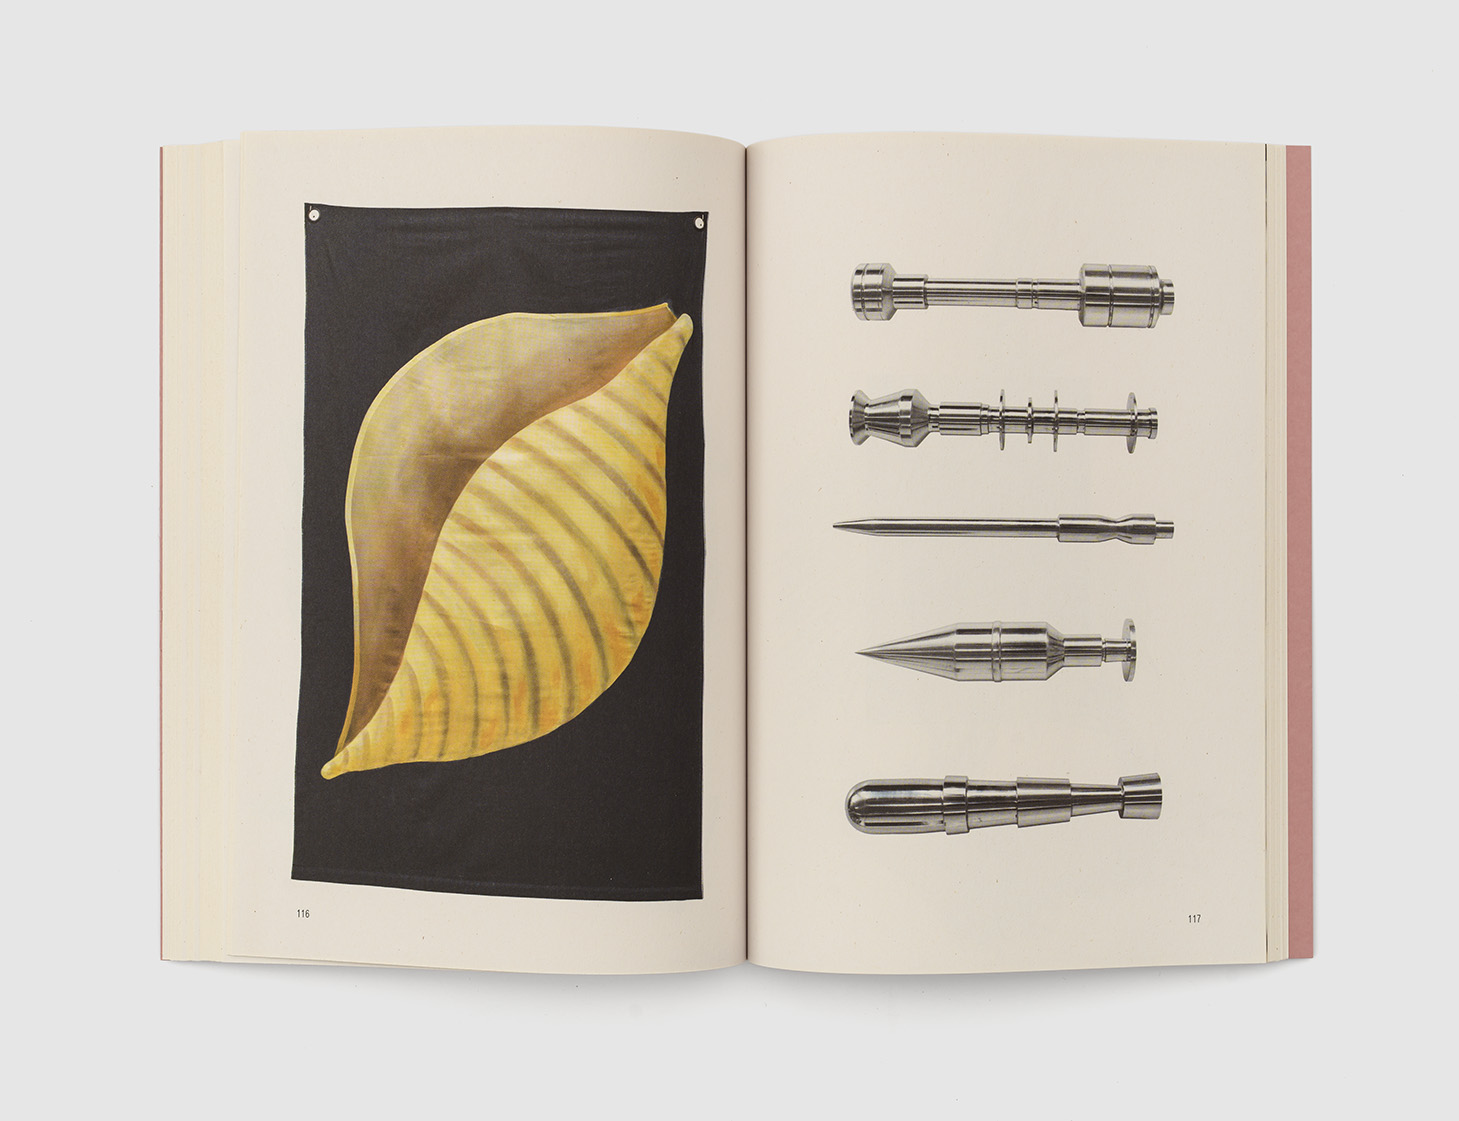 Inner pages showing a shell painted on linen on the left and longish objects out of metal on the right